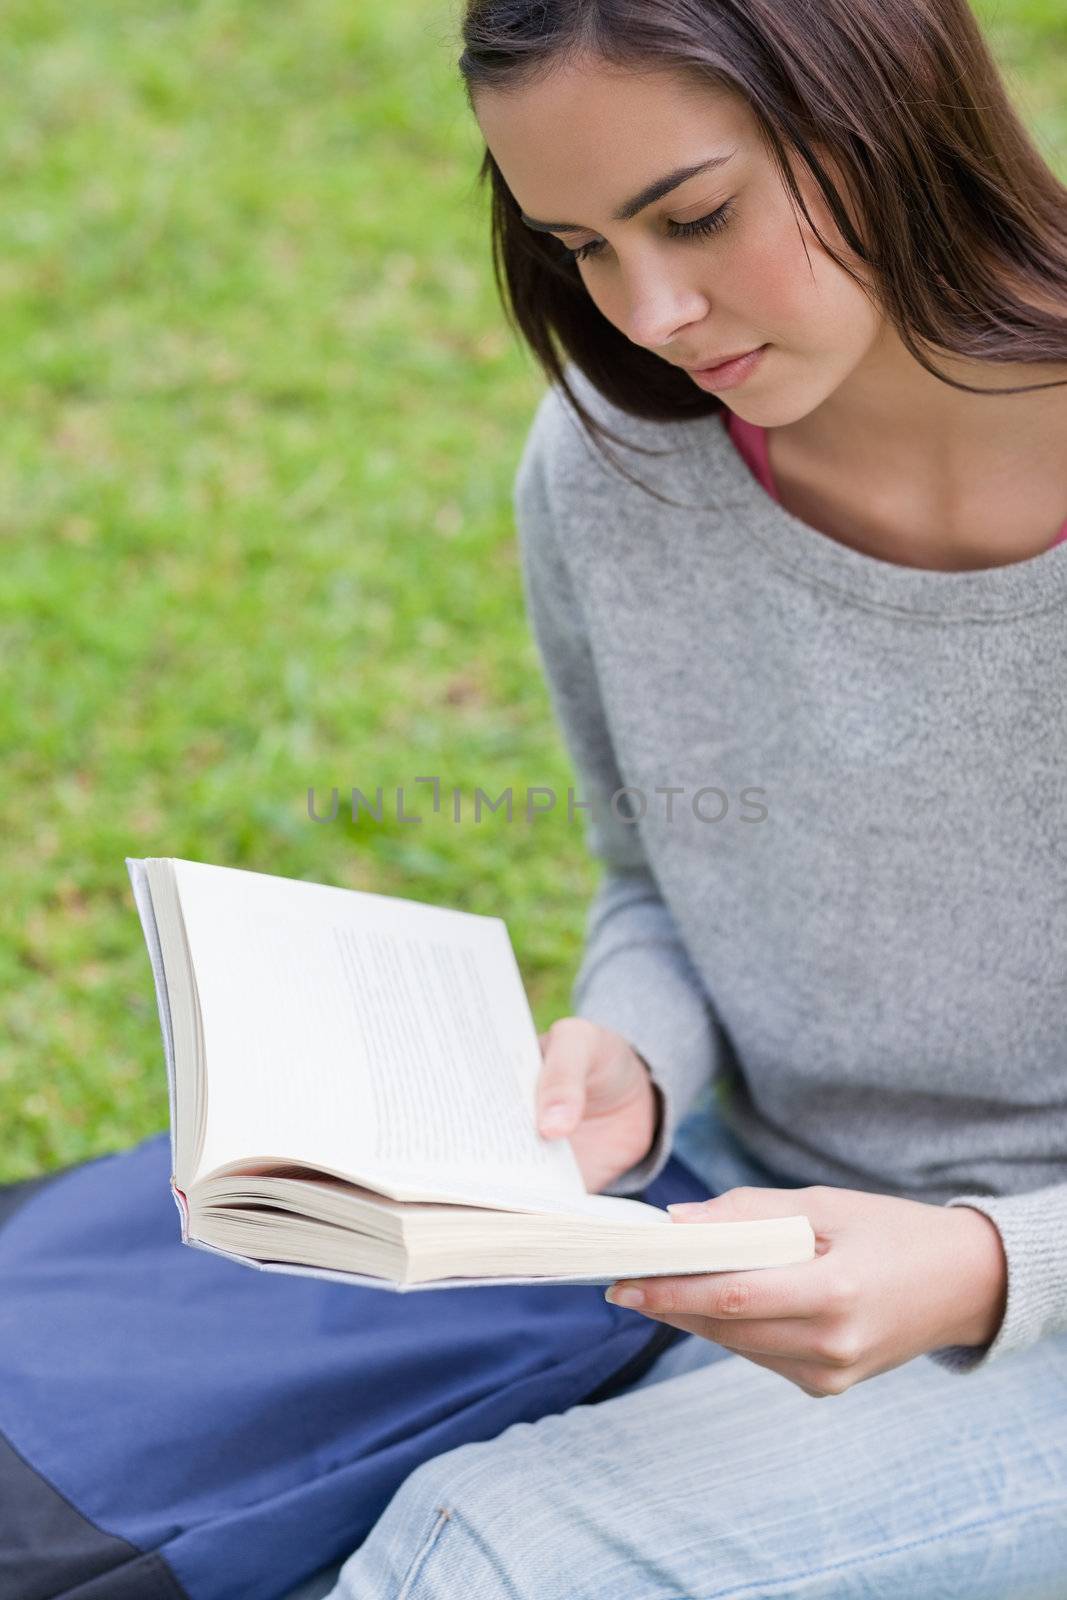 Serious young girl sitting on the grass while reading a book by Wavebreakmedia